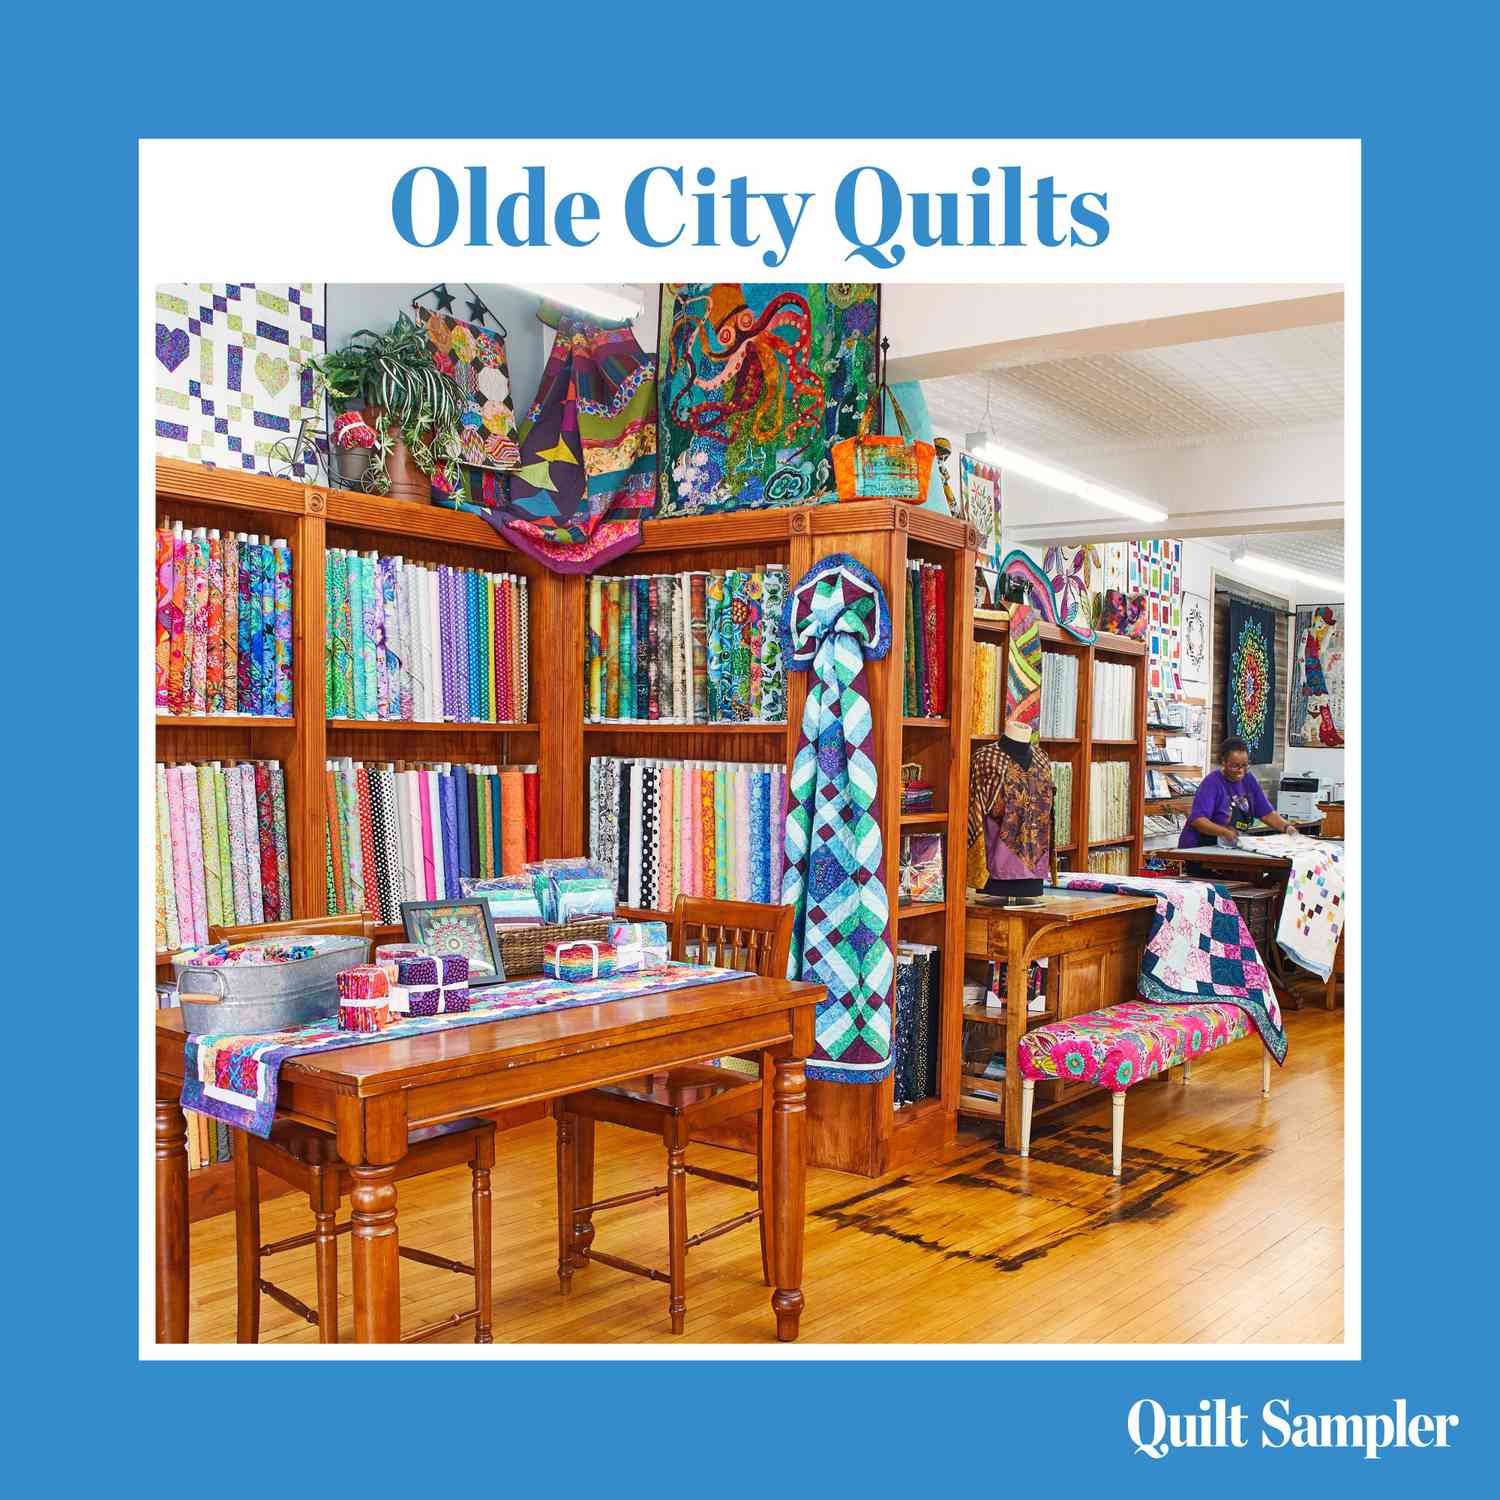 Olde City Quilts